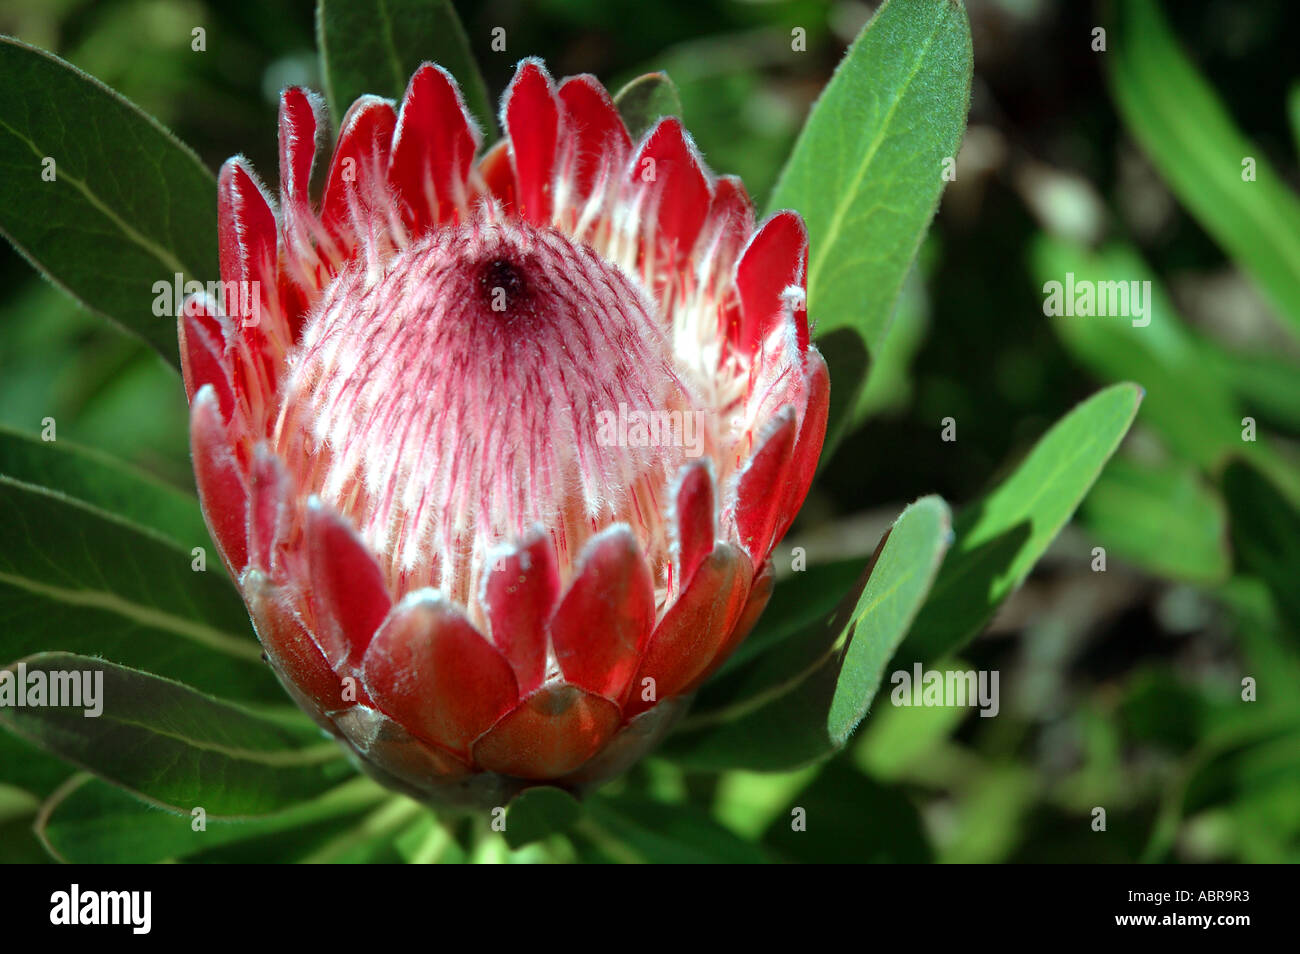 Protea species aristata or repens native plant of fynbos regions of South Africa Stock Photo